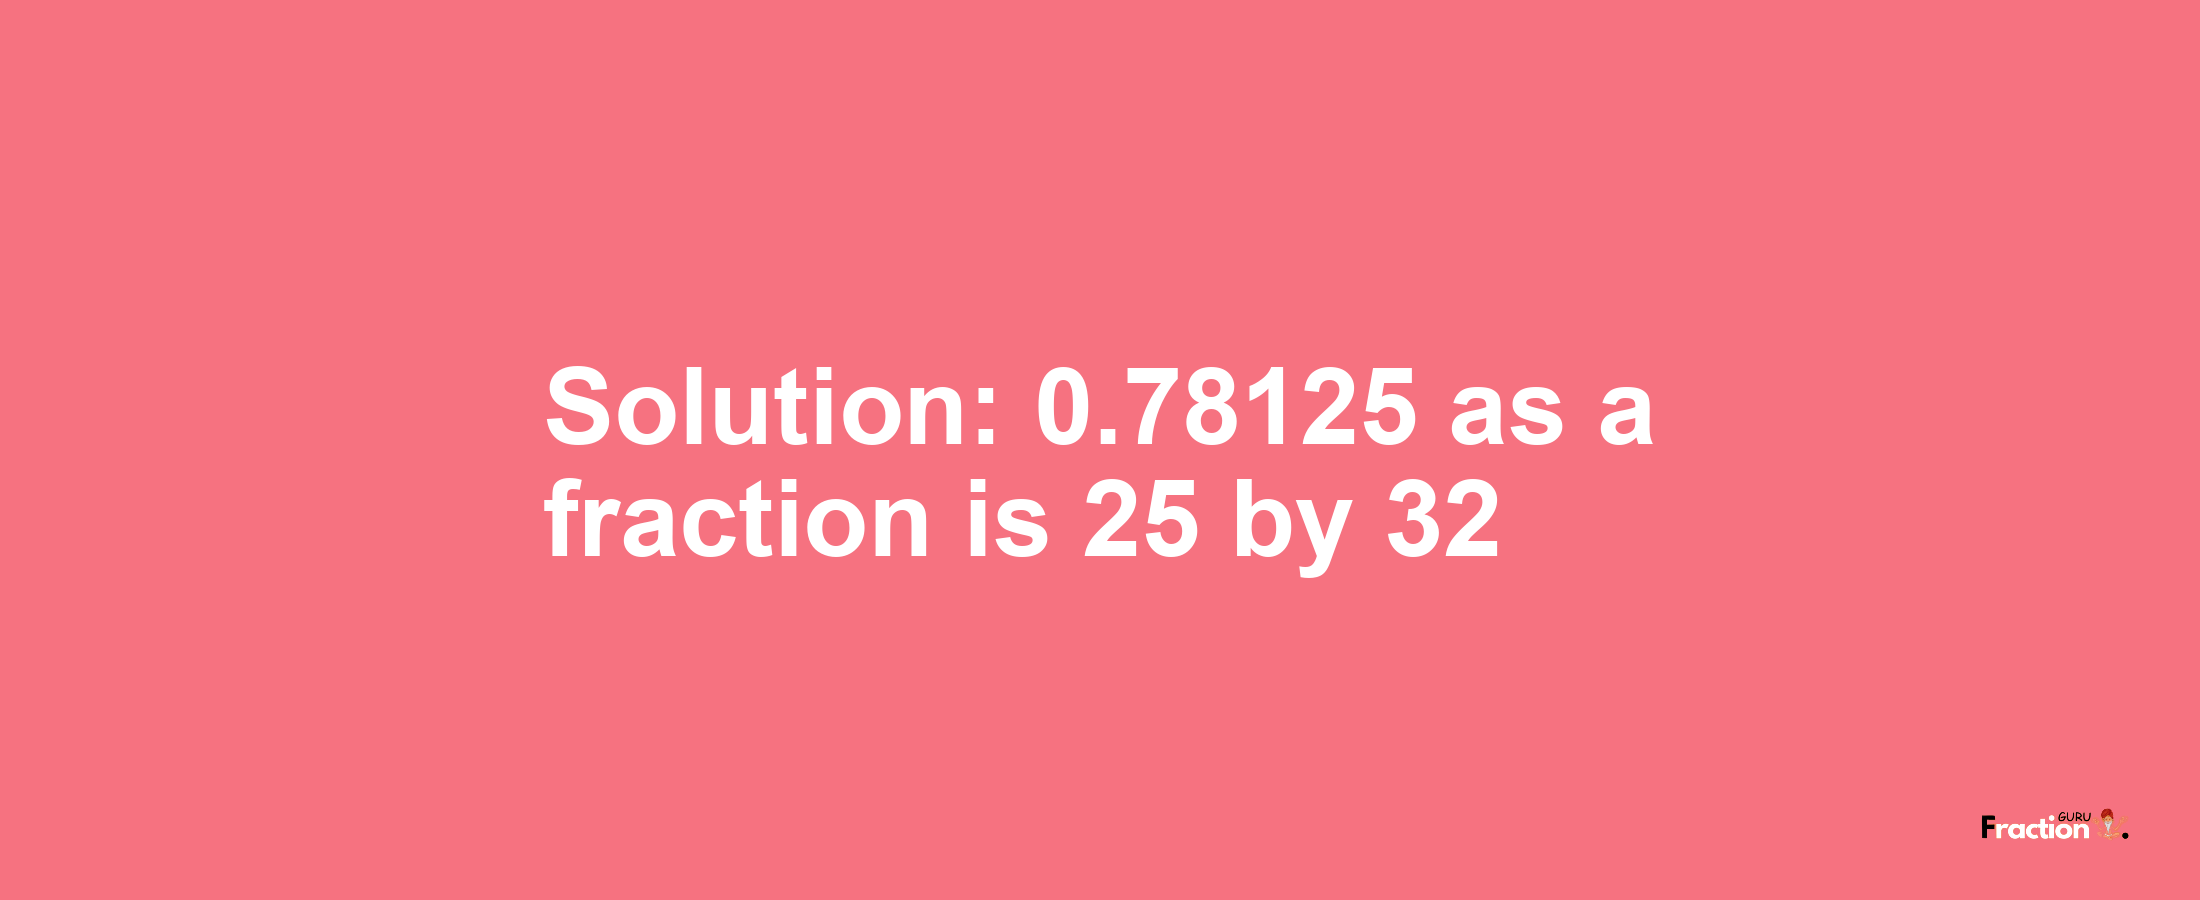 Solution:0.78125 as a fraction is 25/32